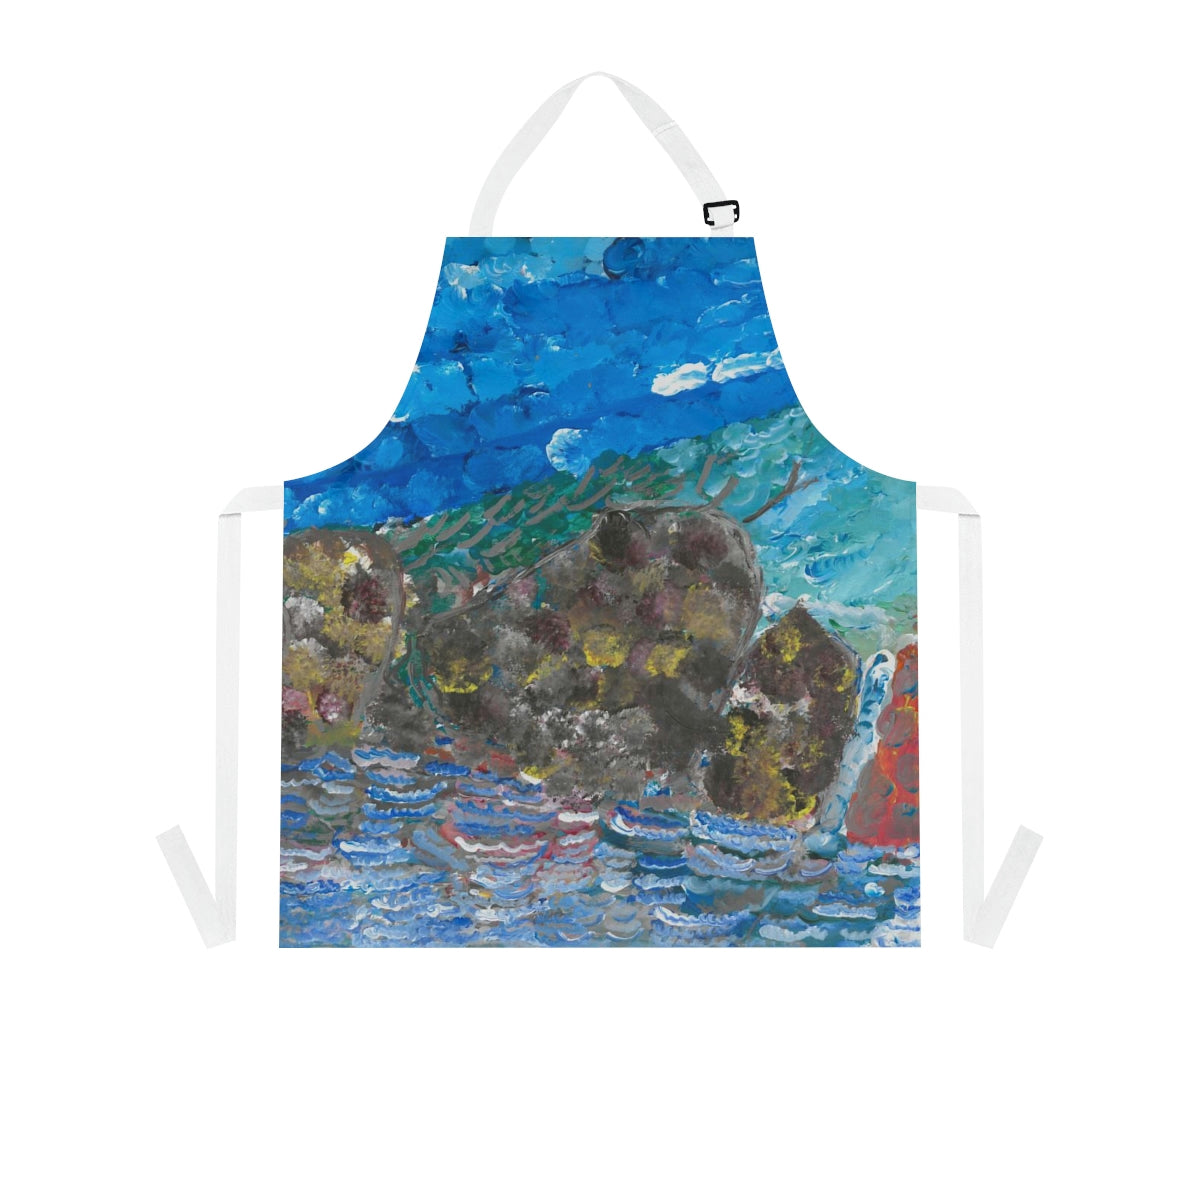 "The reflection of the mountains" Apron by Neville